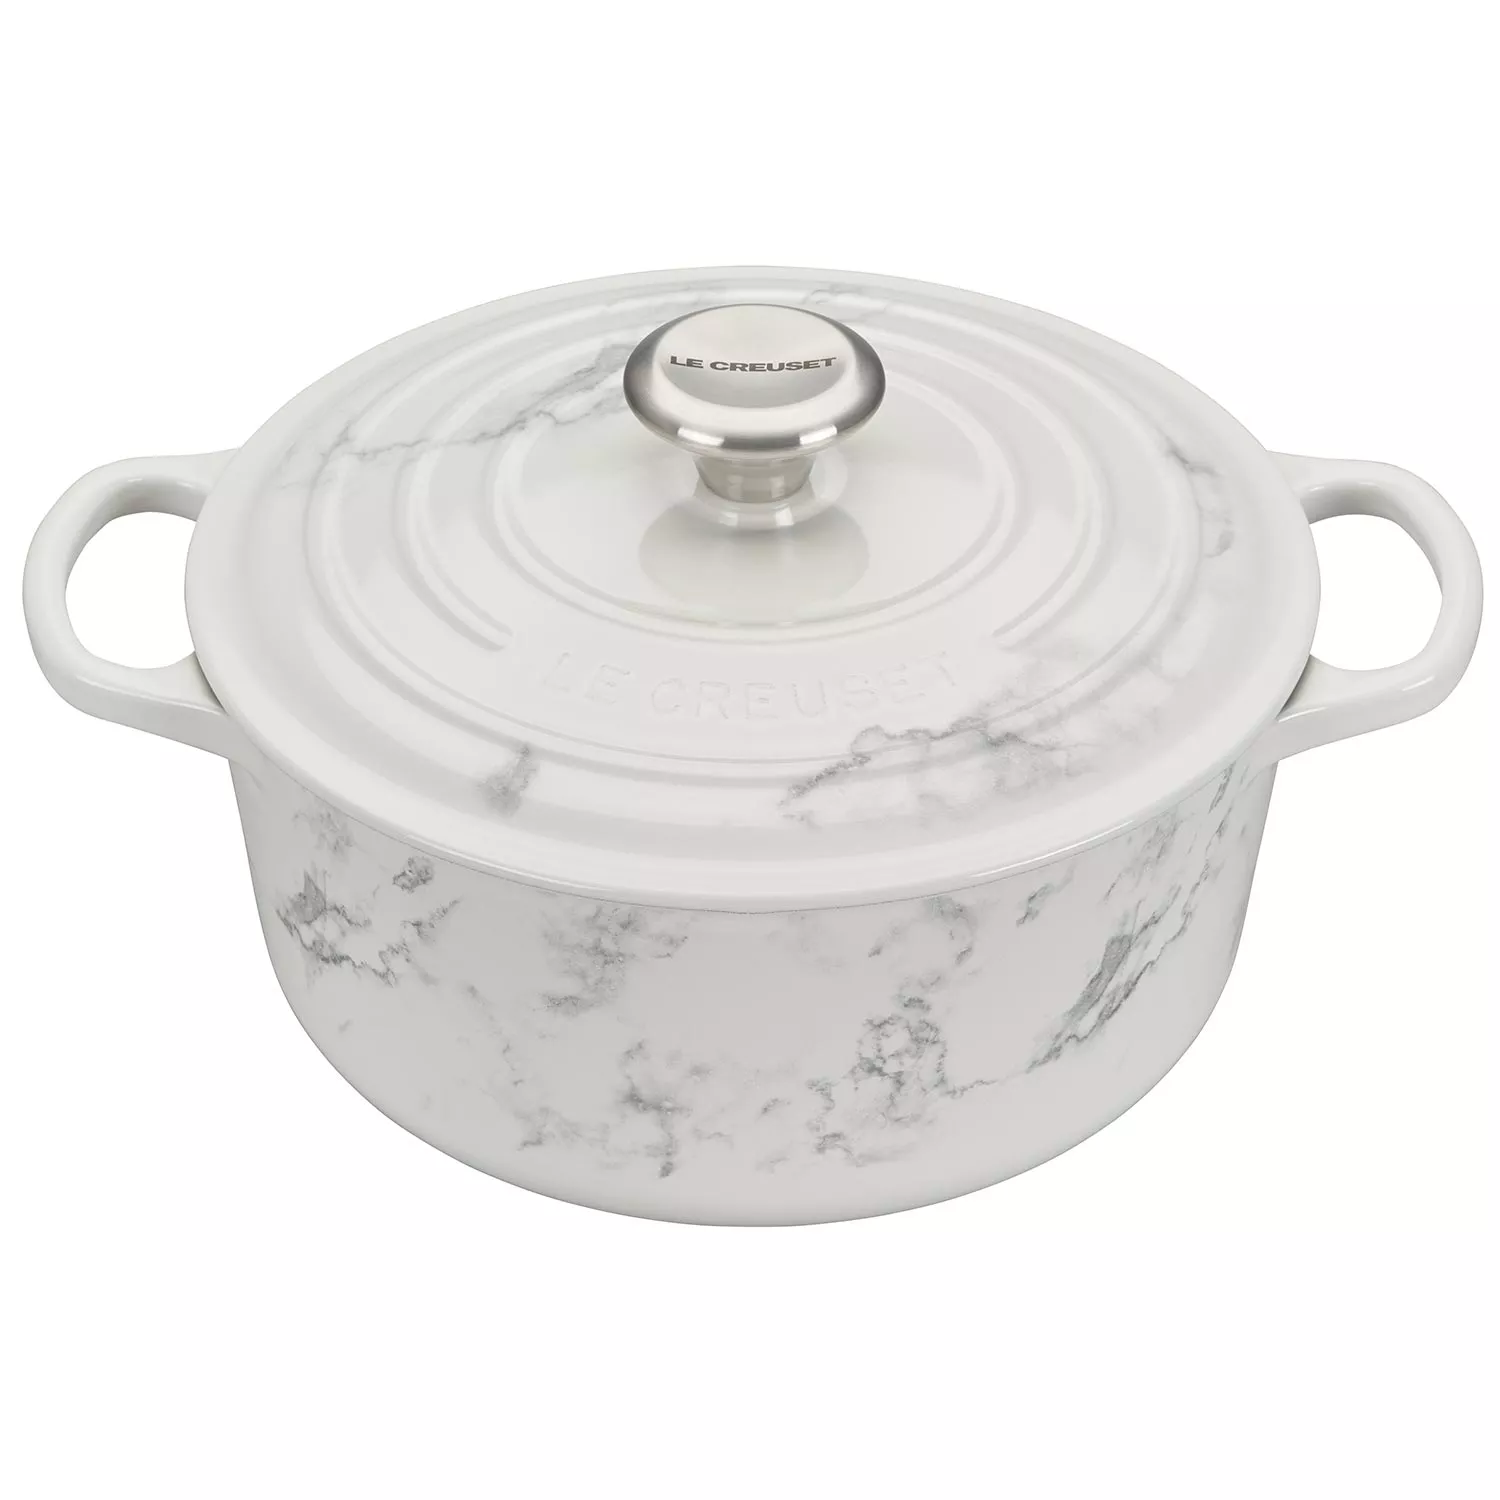 Made in the USA Lodge cast iron Dutch ovens see Cyber Monday deals from $60  (Up to 25% off)